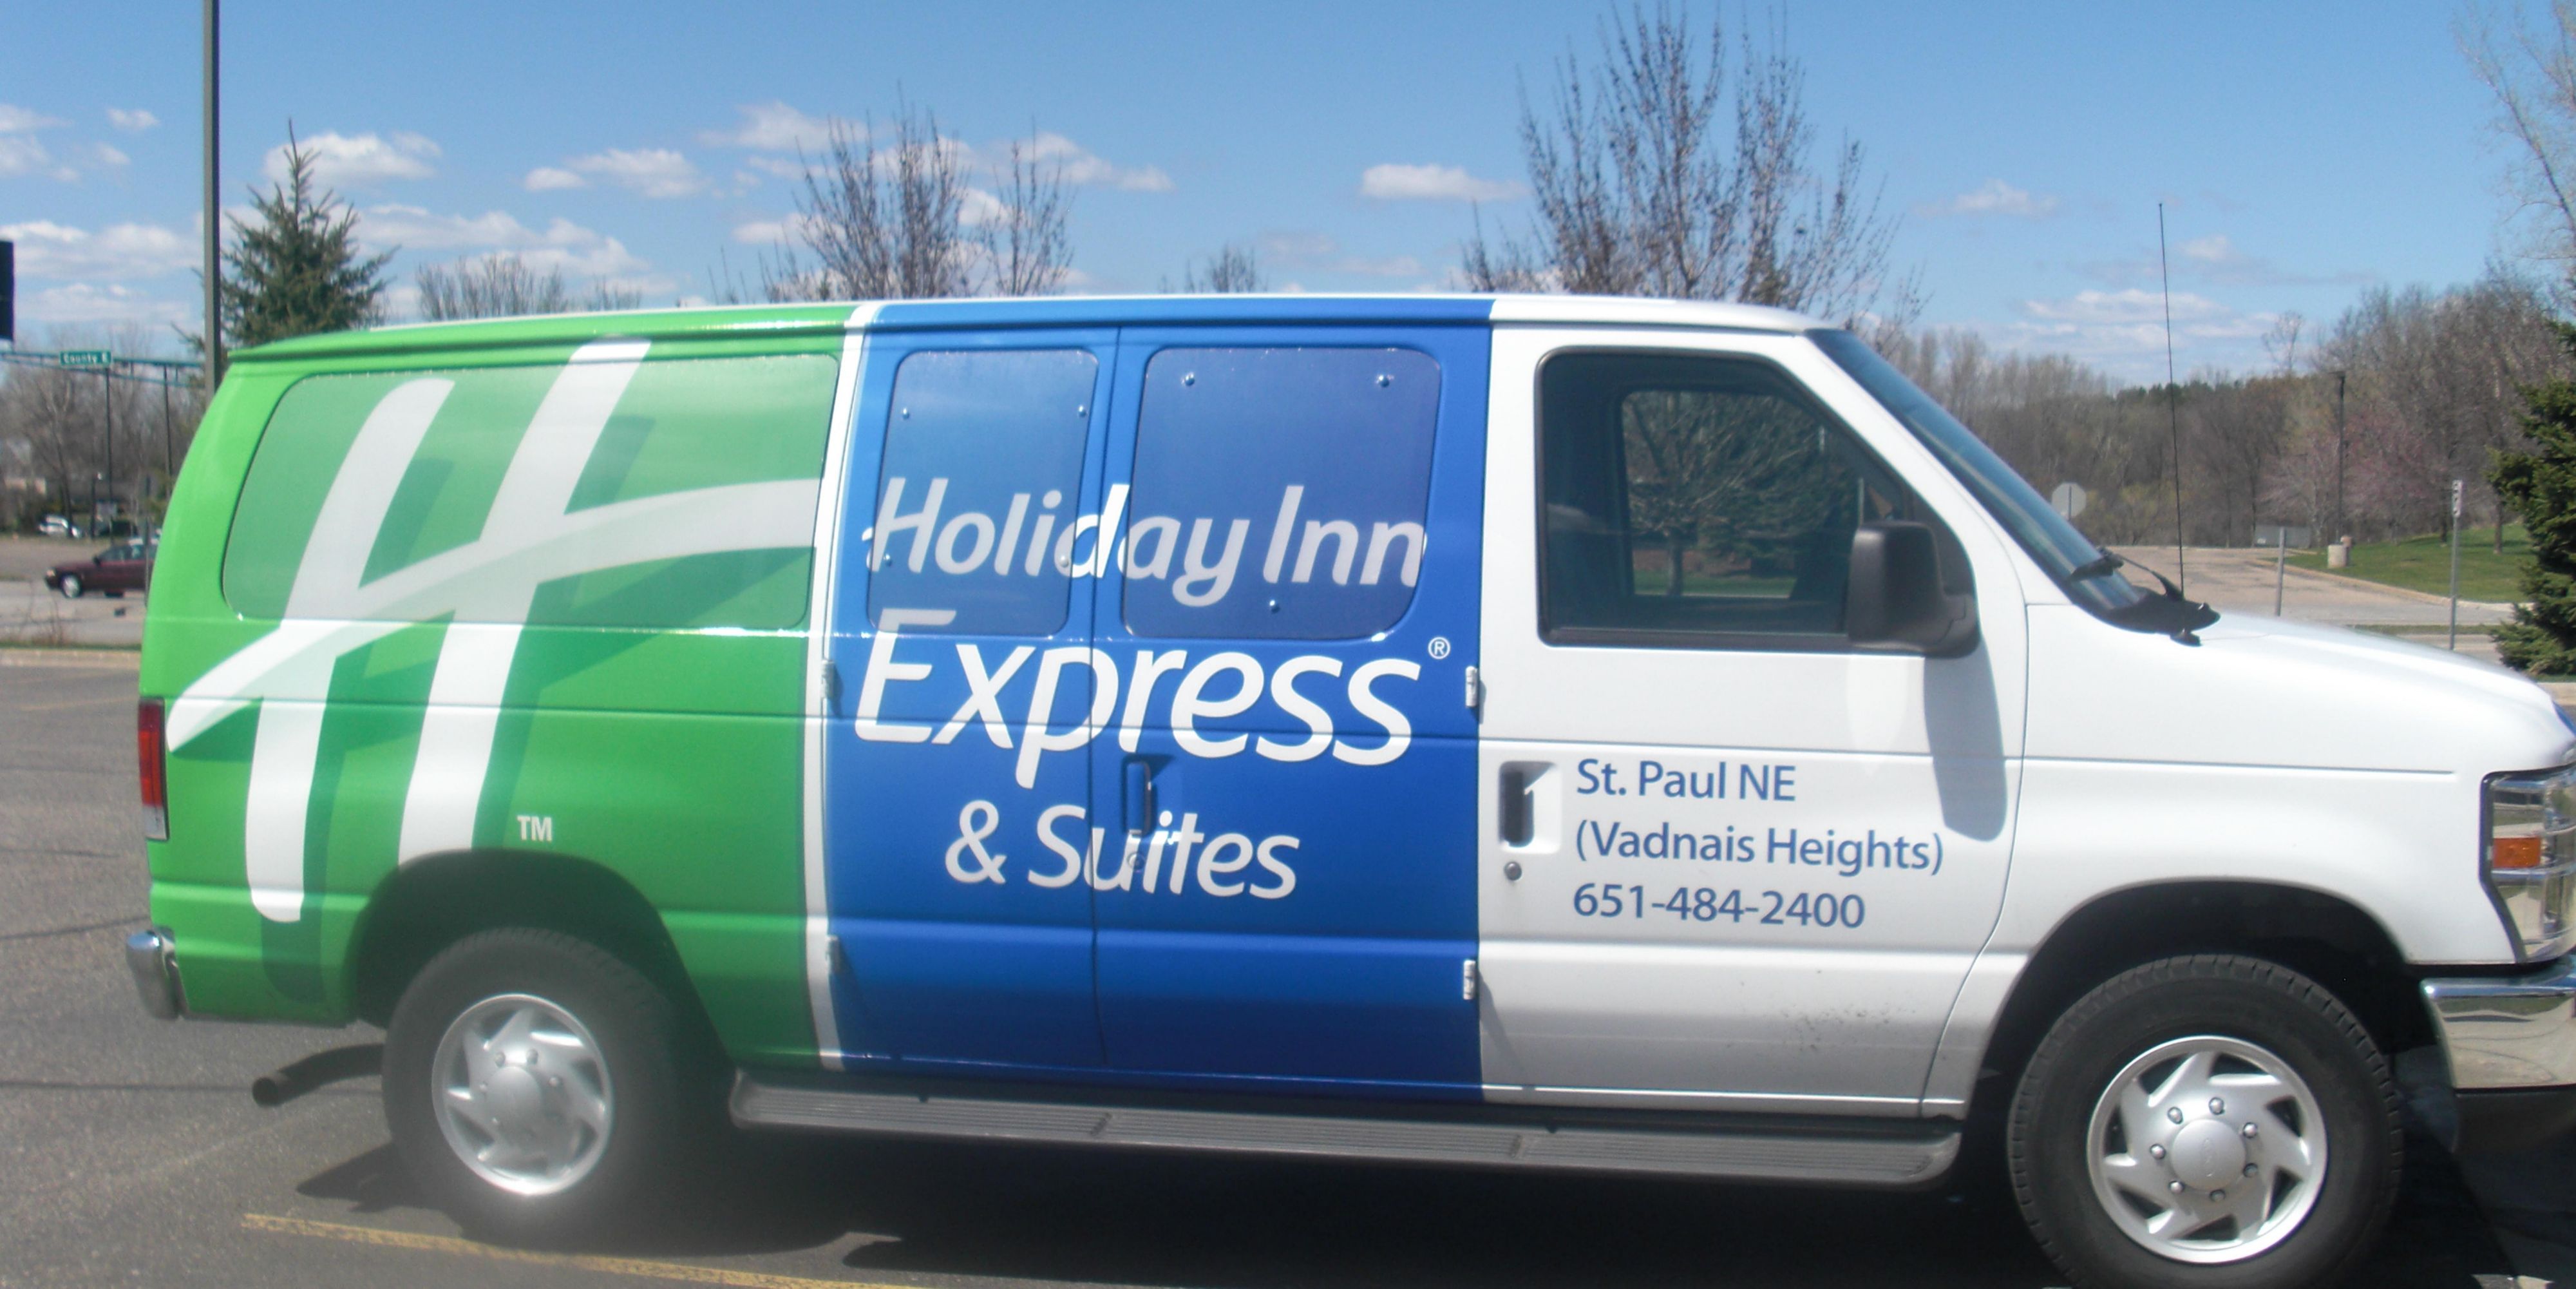 We offer a hotel shuttle within a 5 mile radius available for rent. Call for availability and to inquire about pricing.